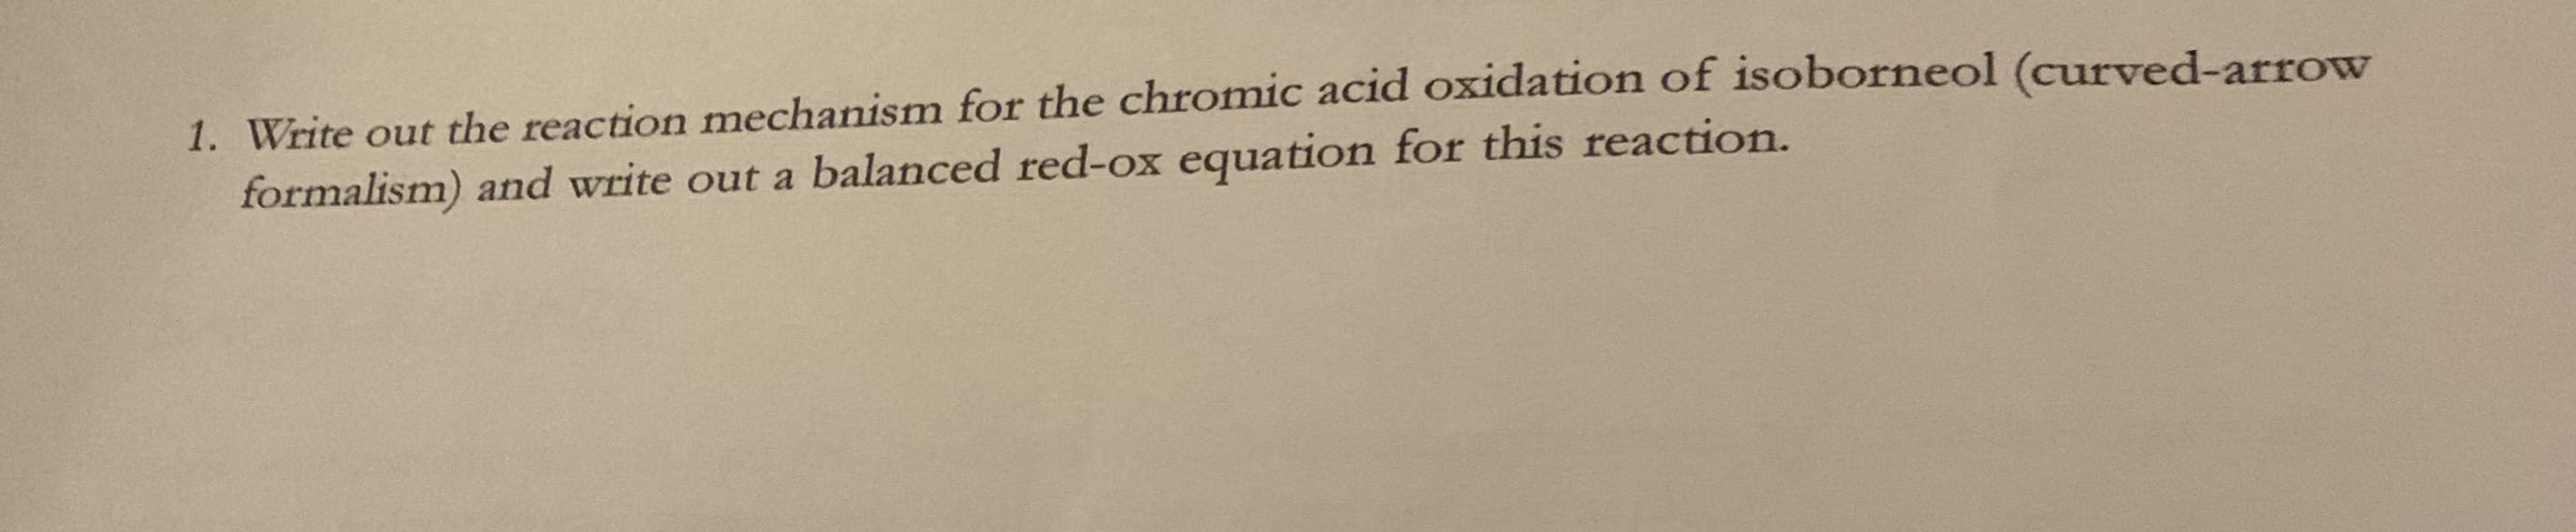 1. Write out the reaction mechanism for the chromic acid oxidation of isoborneol (curved-arrow
formalism) and write out a balanced red-ox equation for this reaction.
